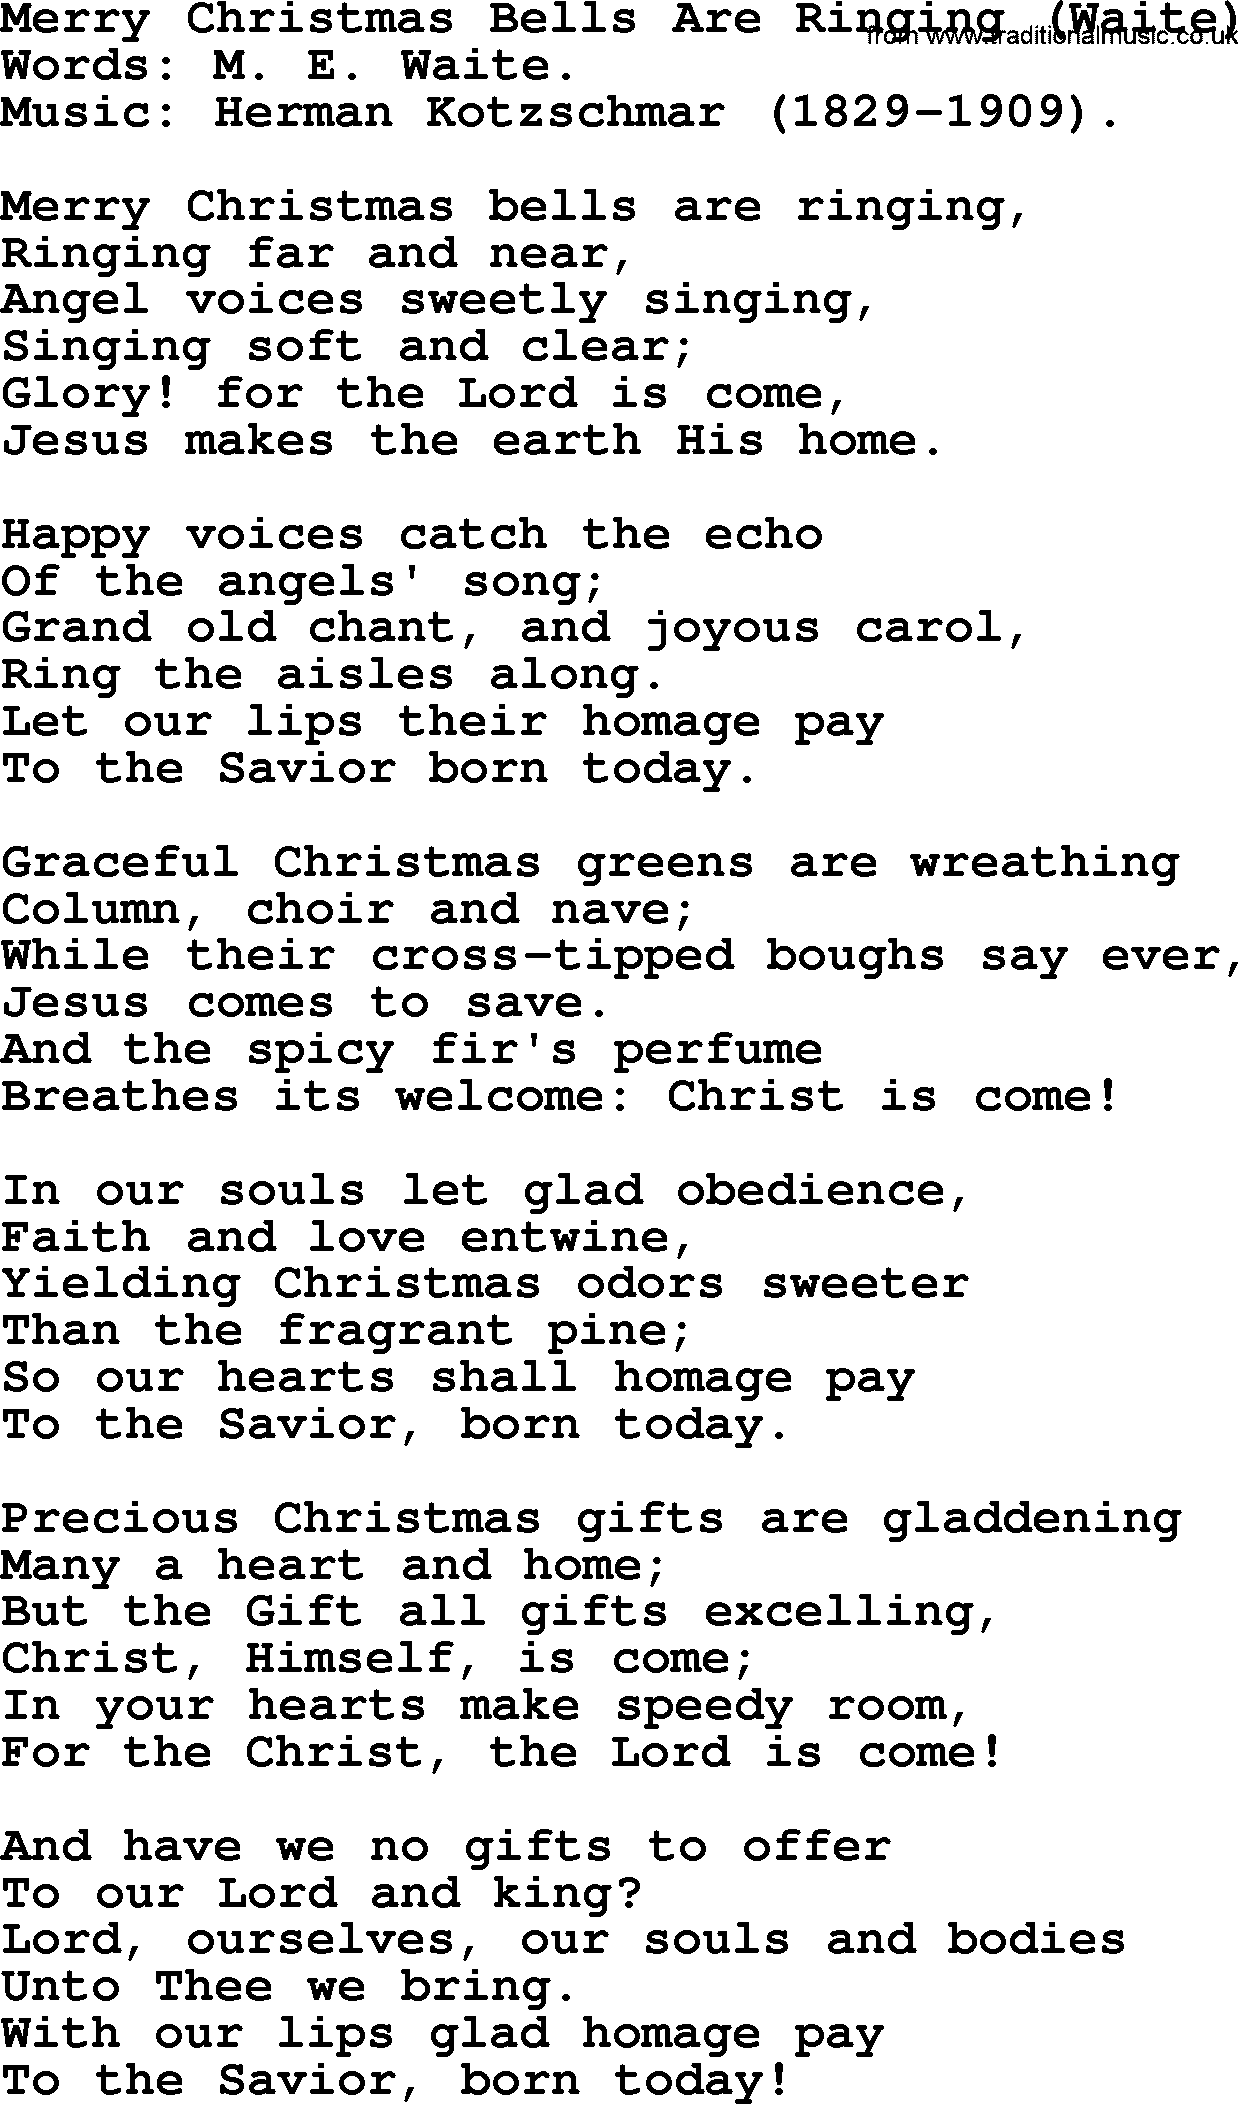 Christmas Hymns, Carols and Songs, title: Merry Christmas Bells Are Ringing (waite), lyrics with PDF